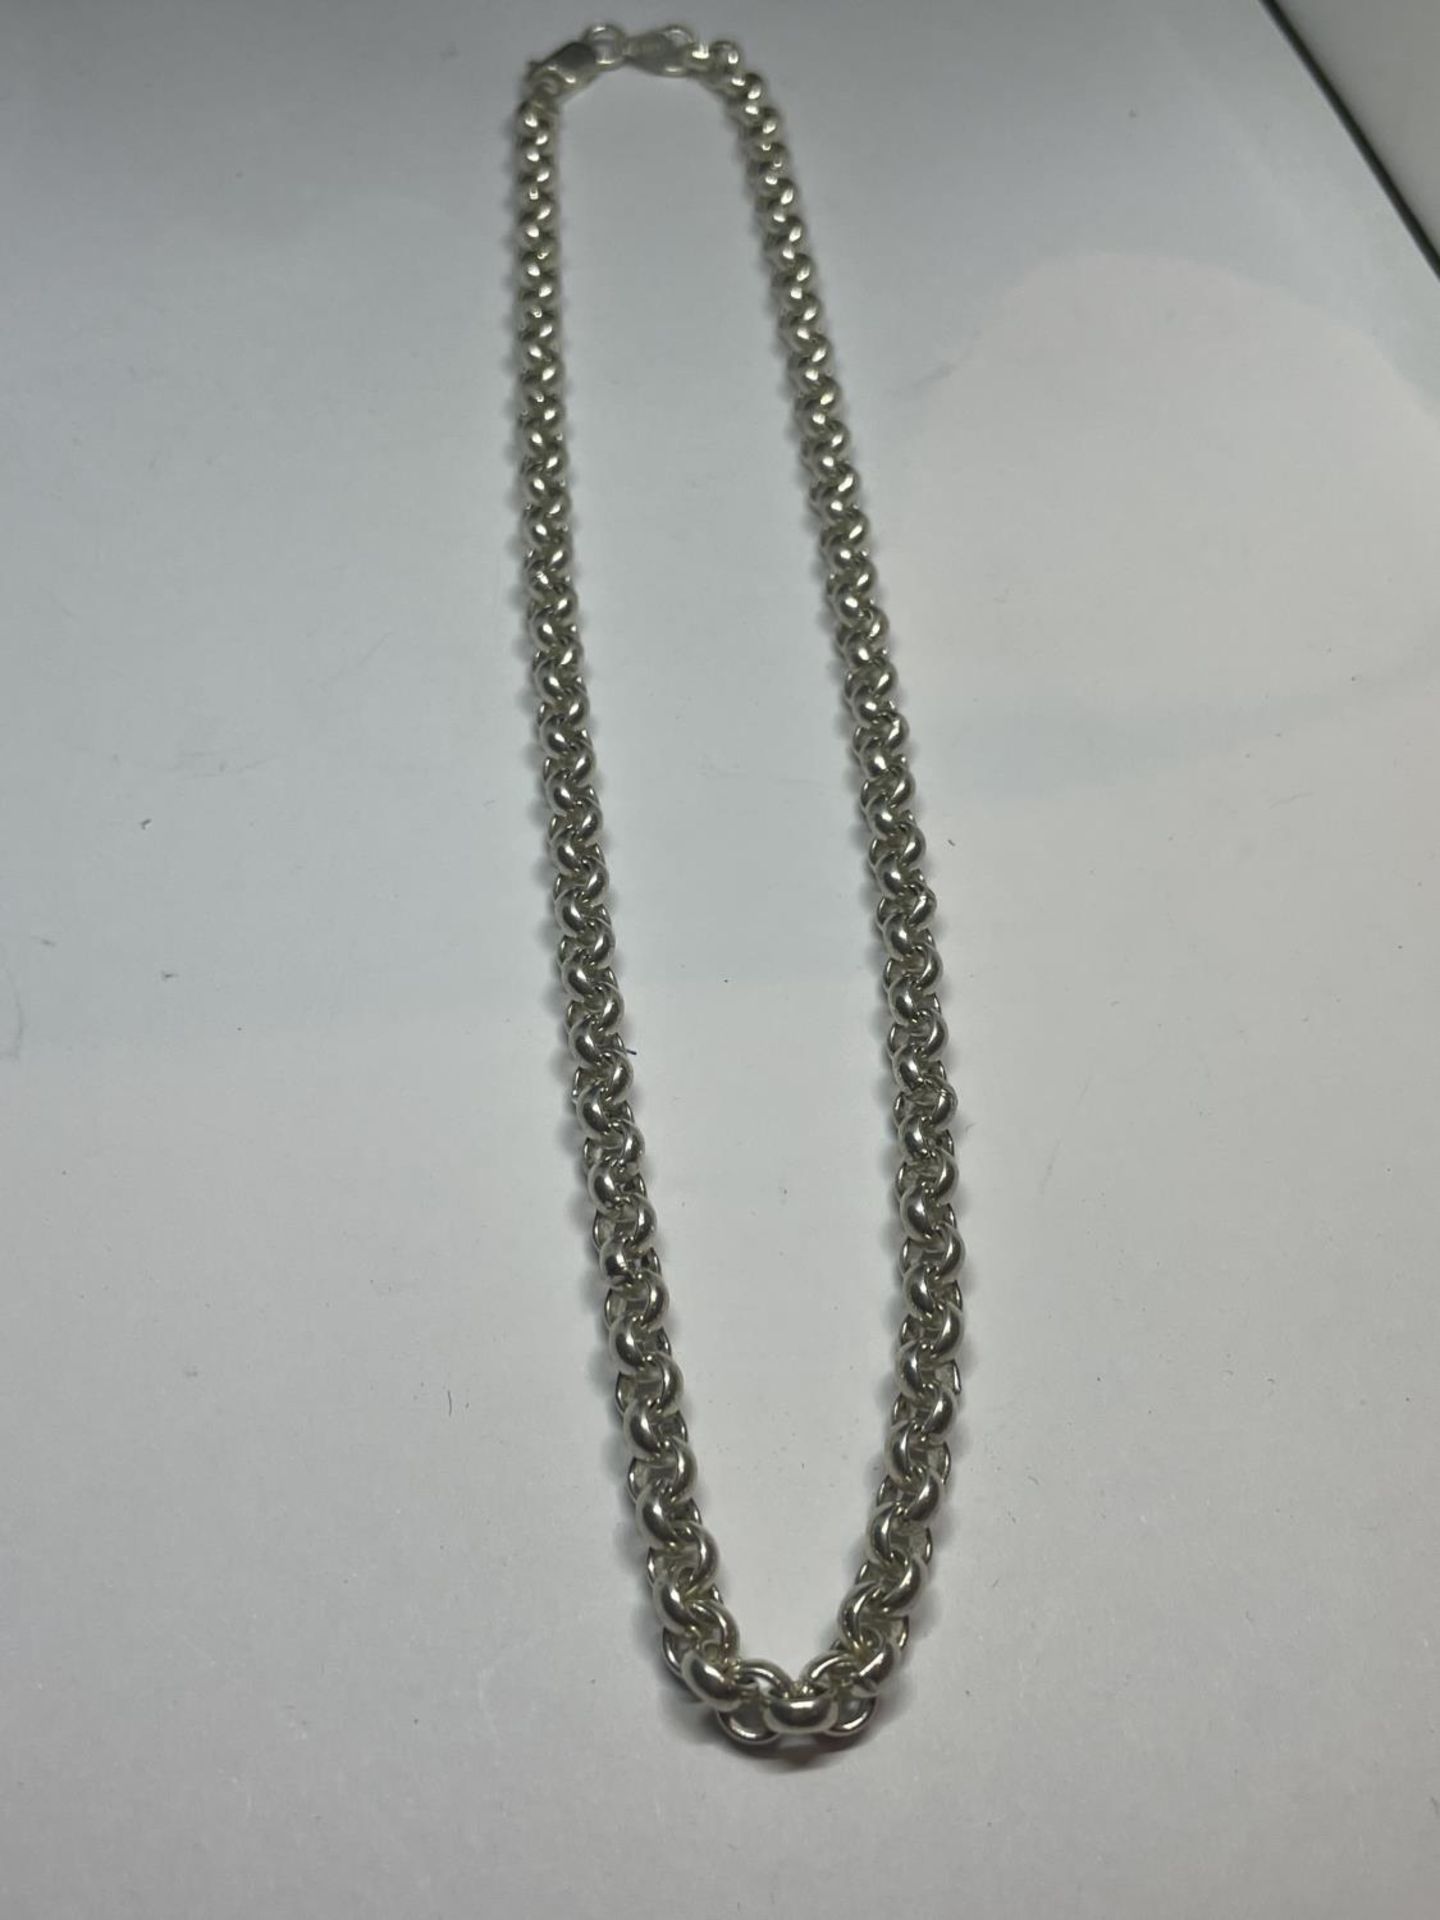 A HEAVY MARKED SILVER BELCHER NECKLACE LENGTH 18 INCHES